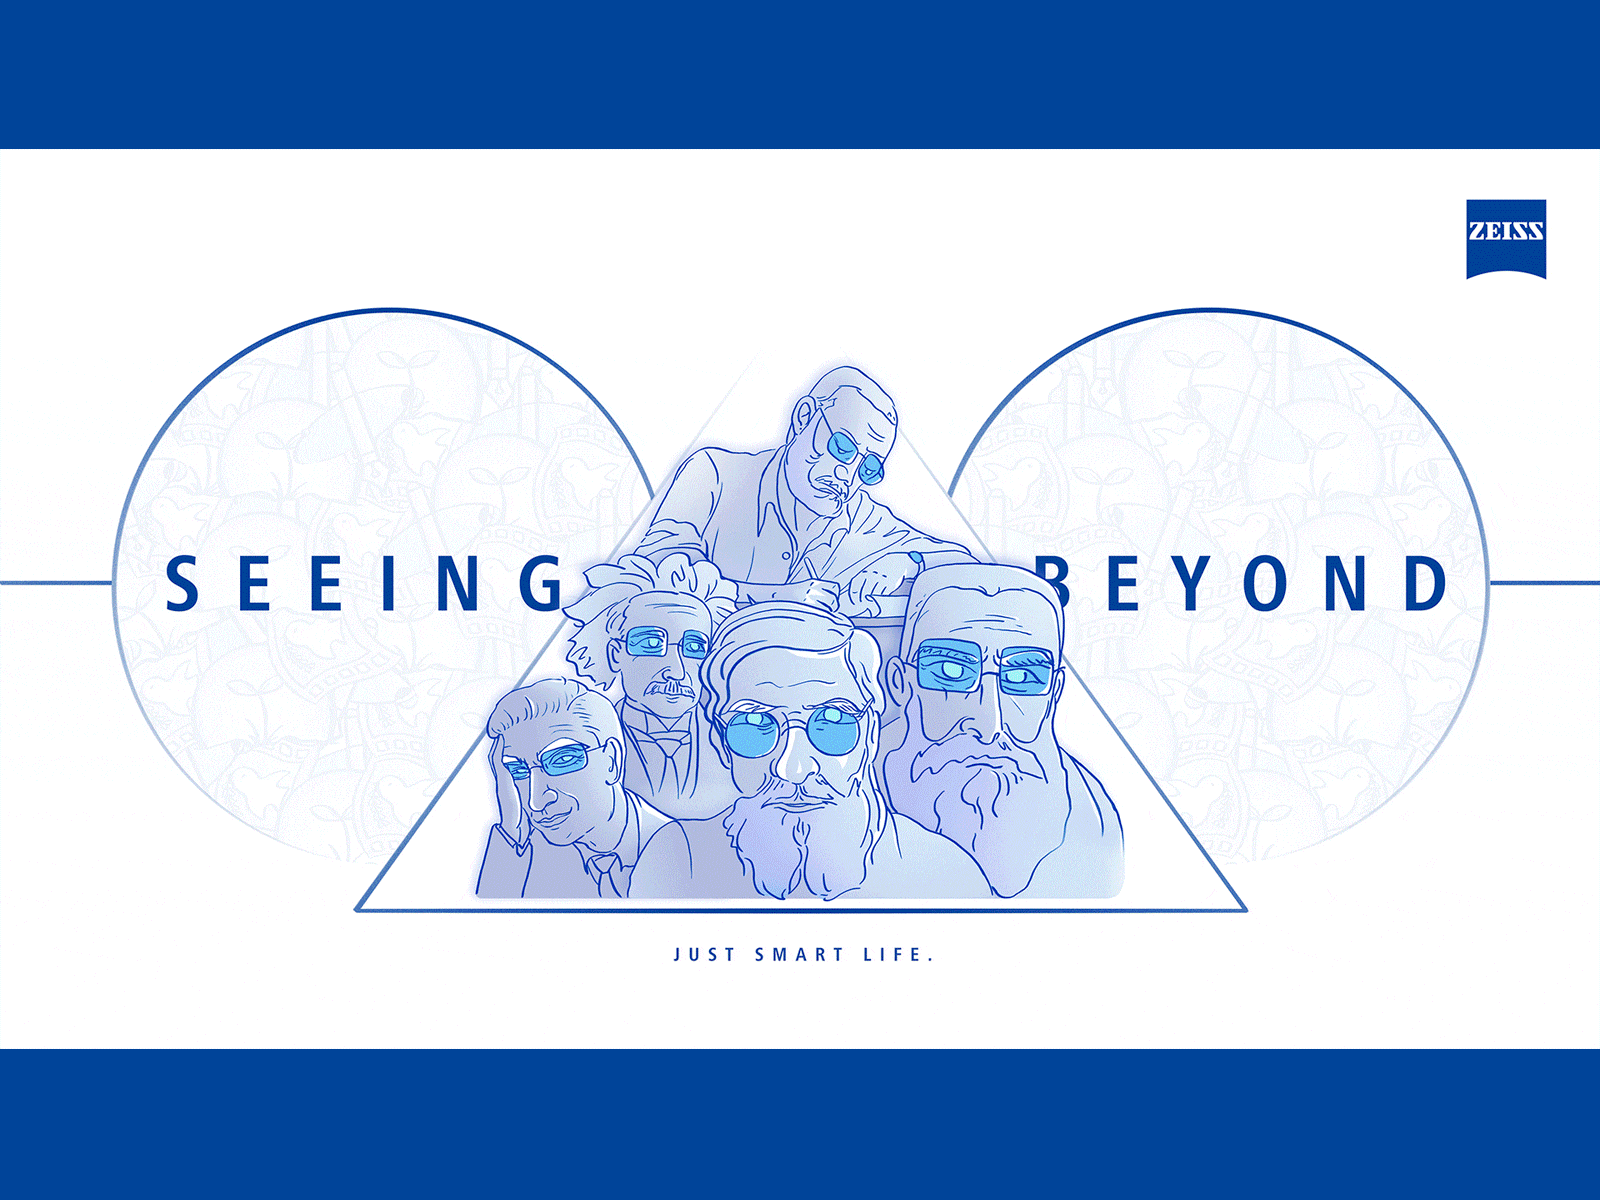 ZEISS：SEEING BEYOND